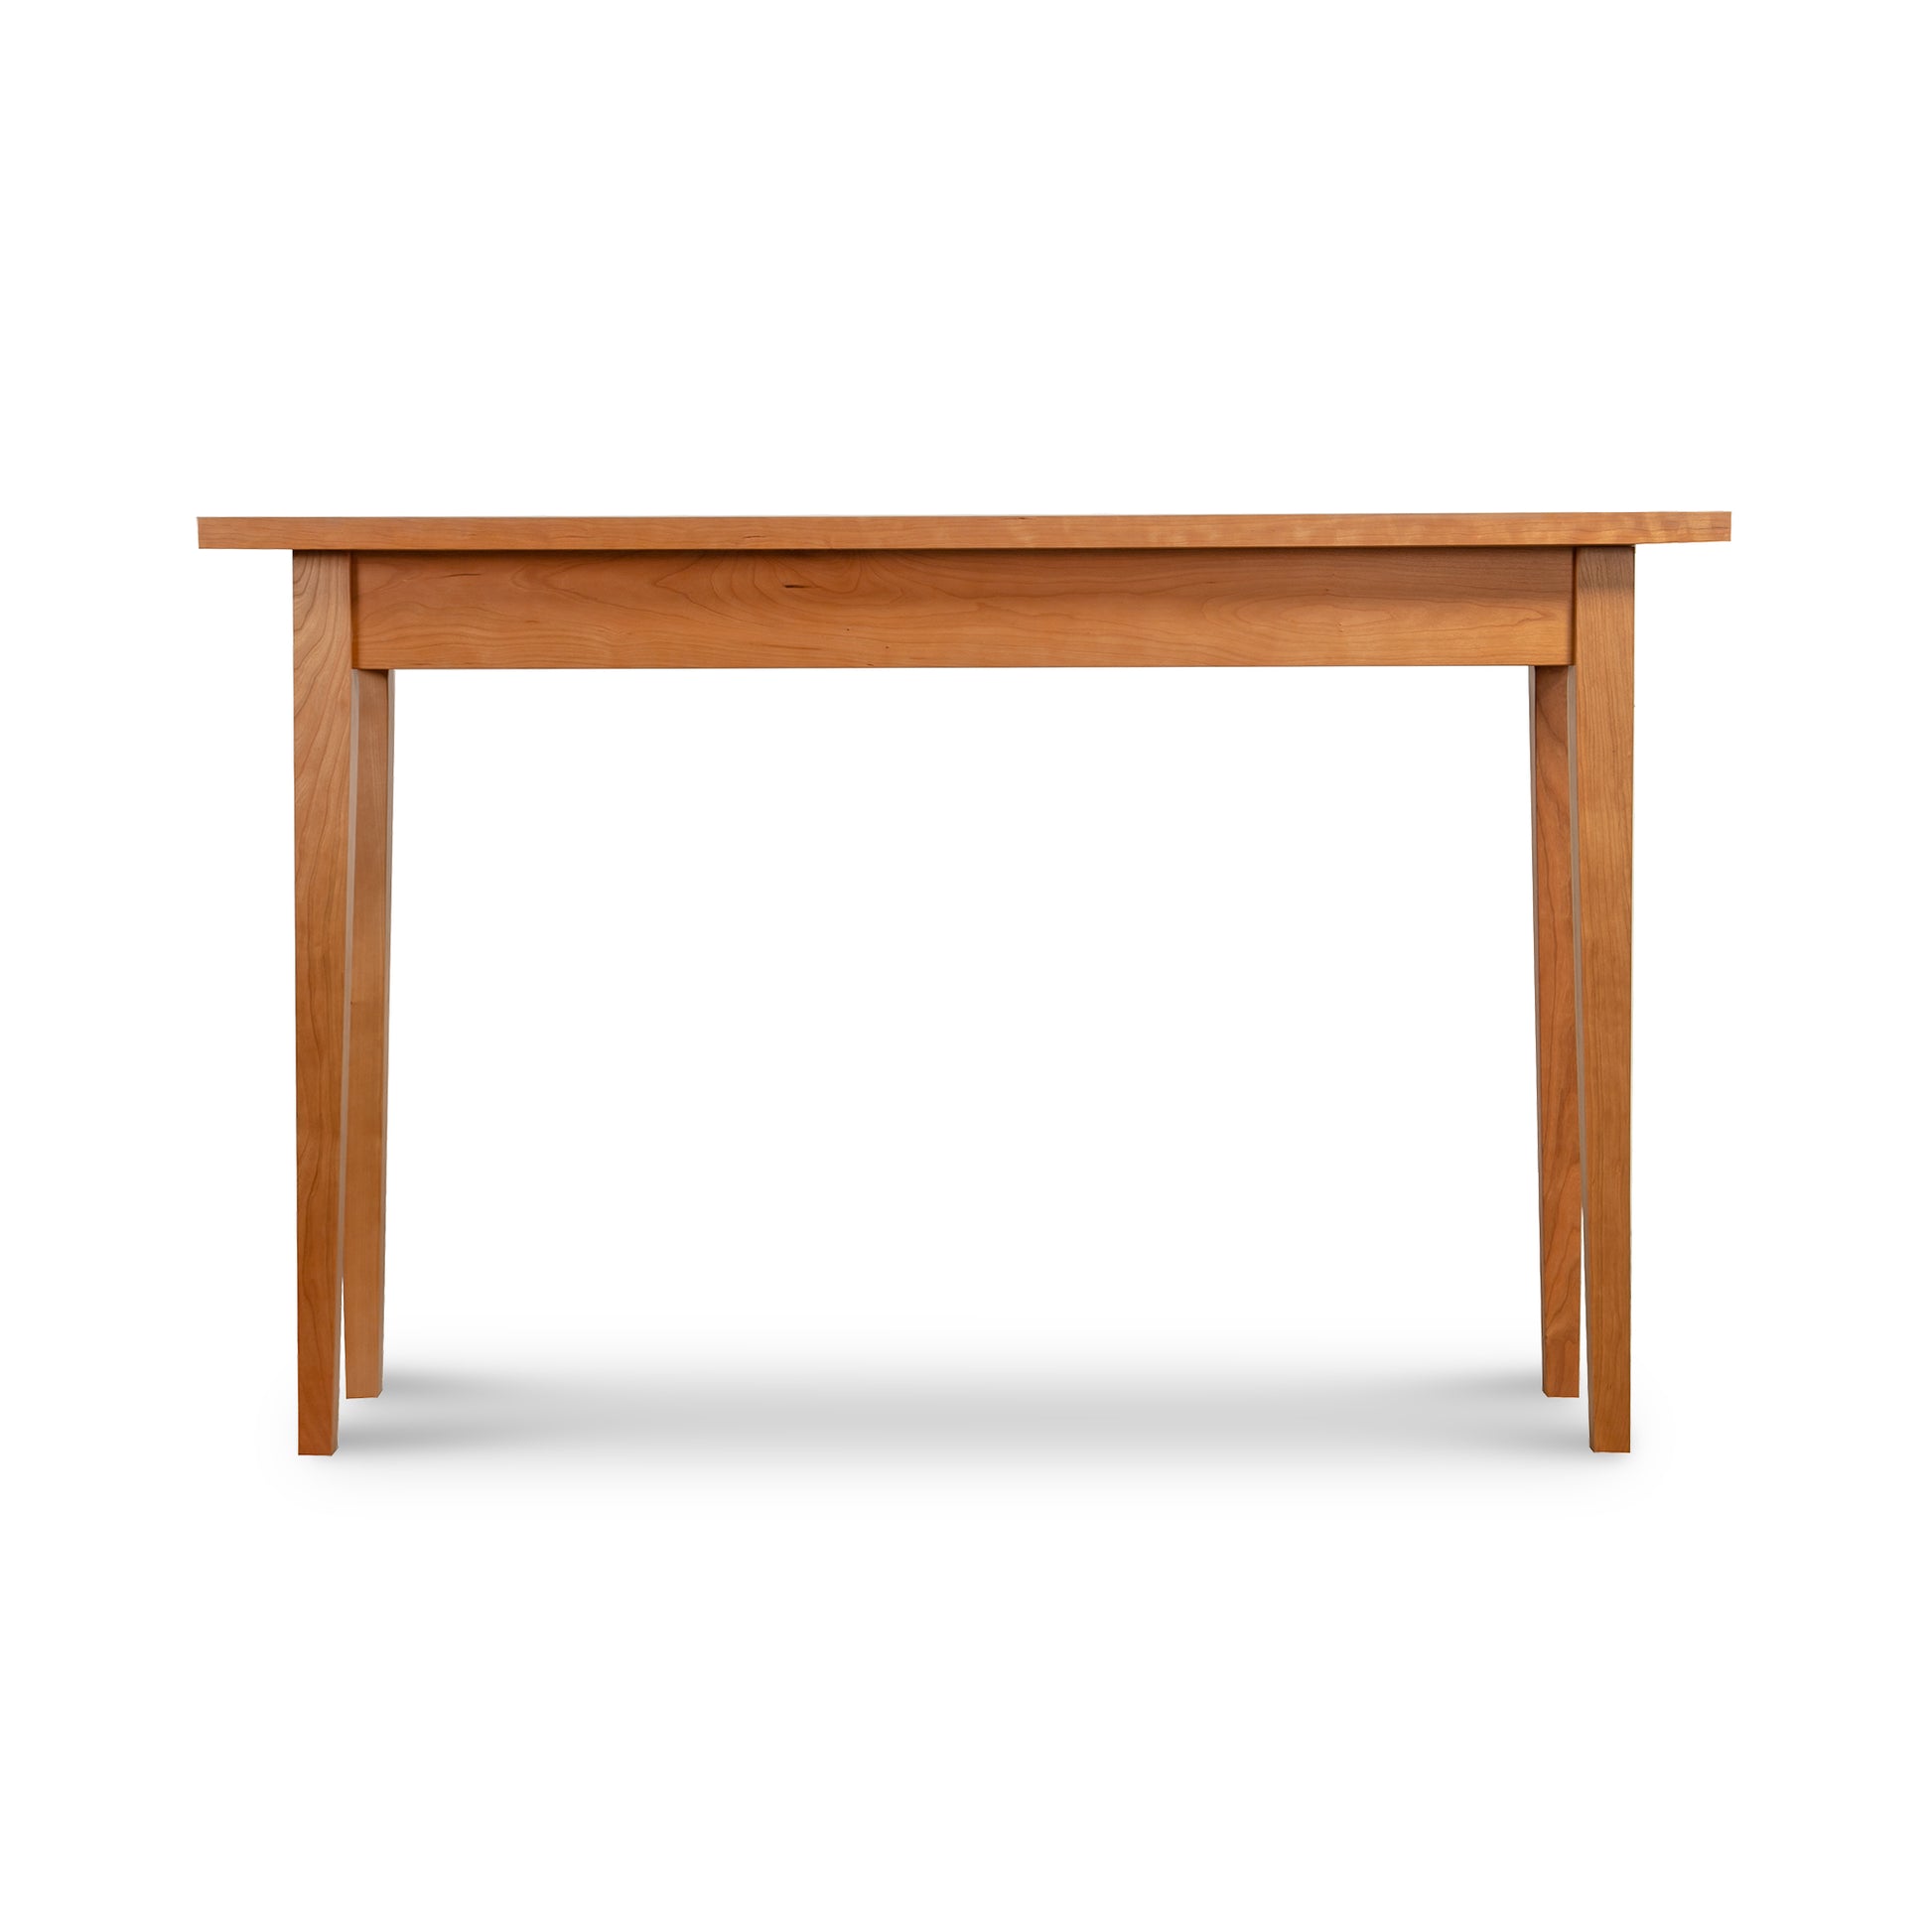 A Classic Shaker Sofa Table - Floor Model by Lyndon Furniture on a white background.